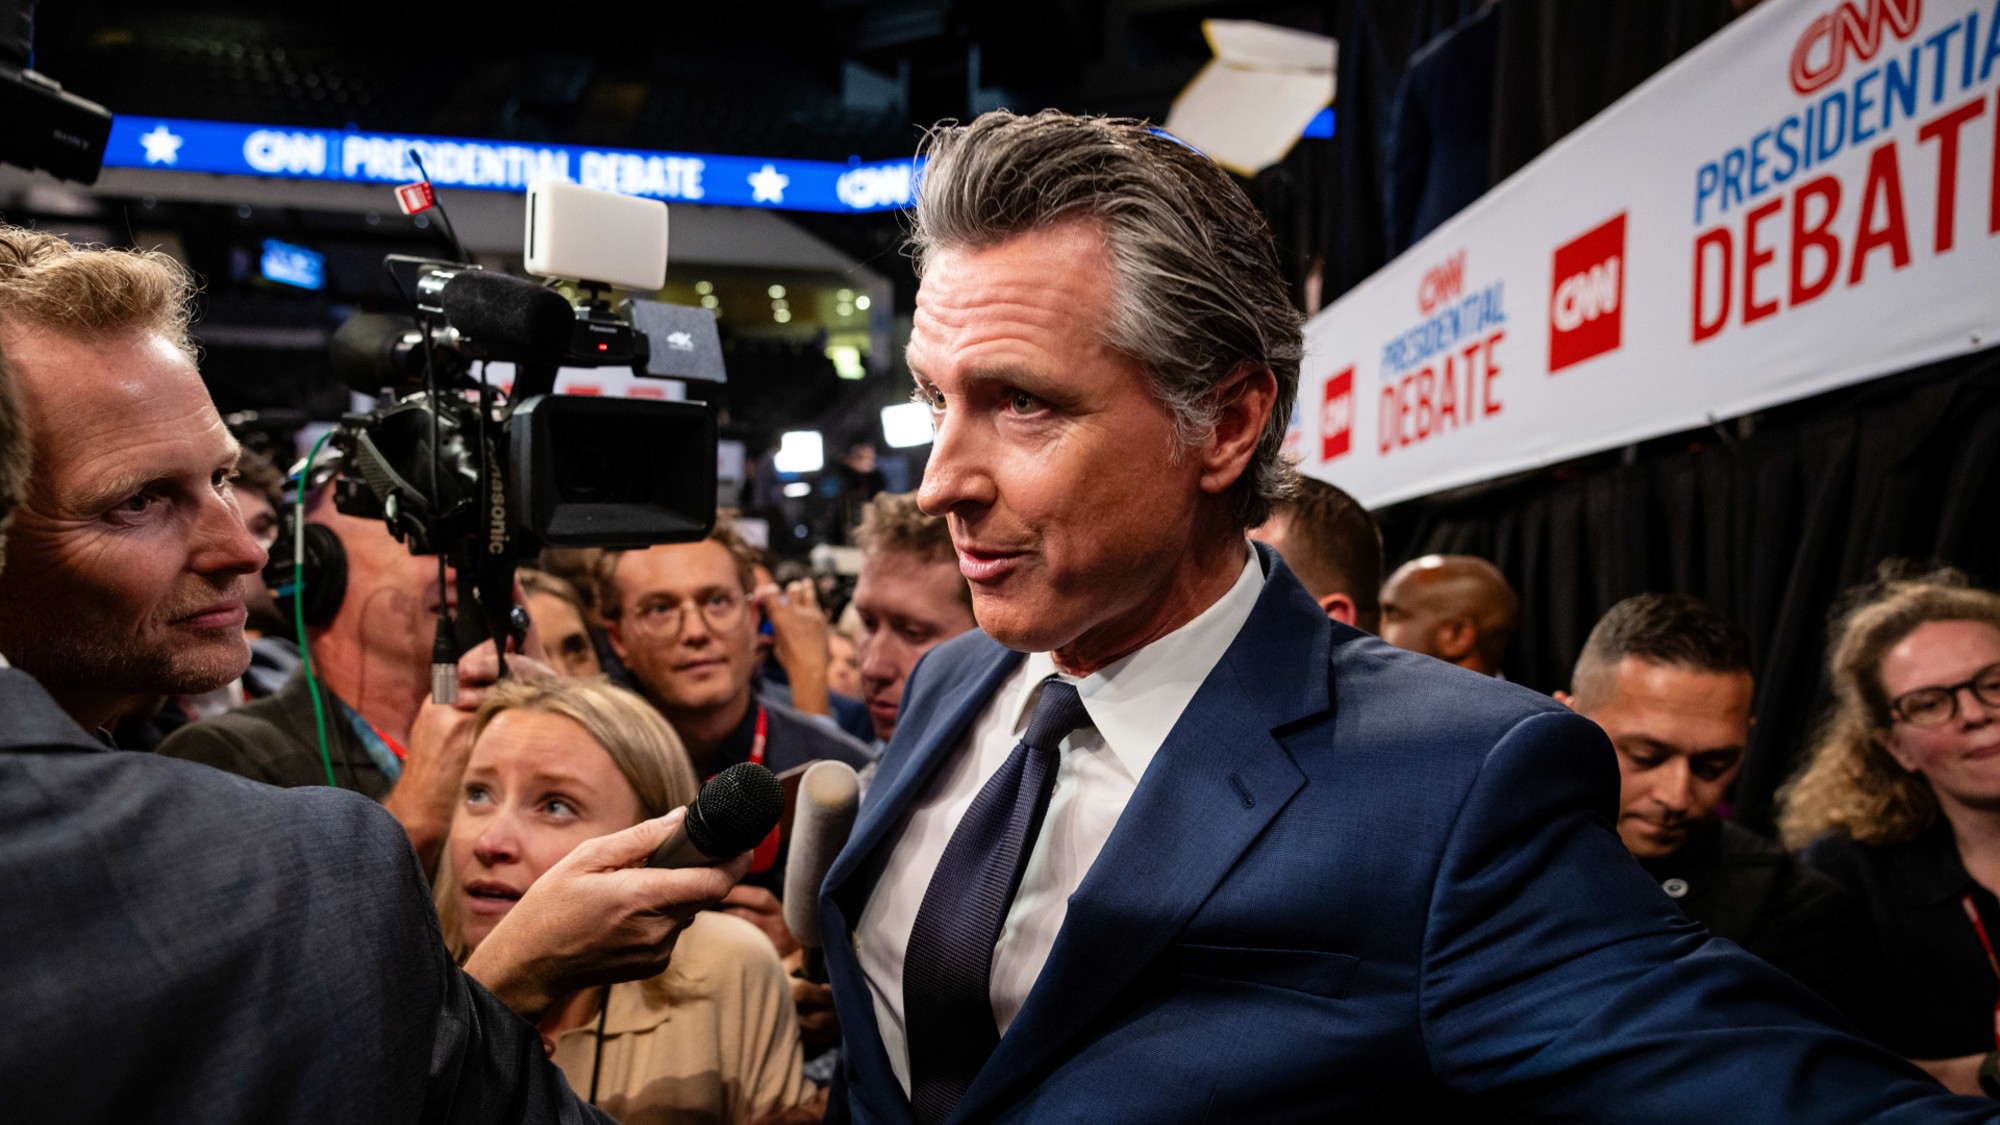  Gavin Newsom, the California governor who could hit the national stage 